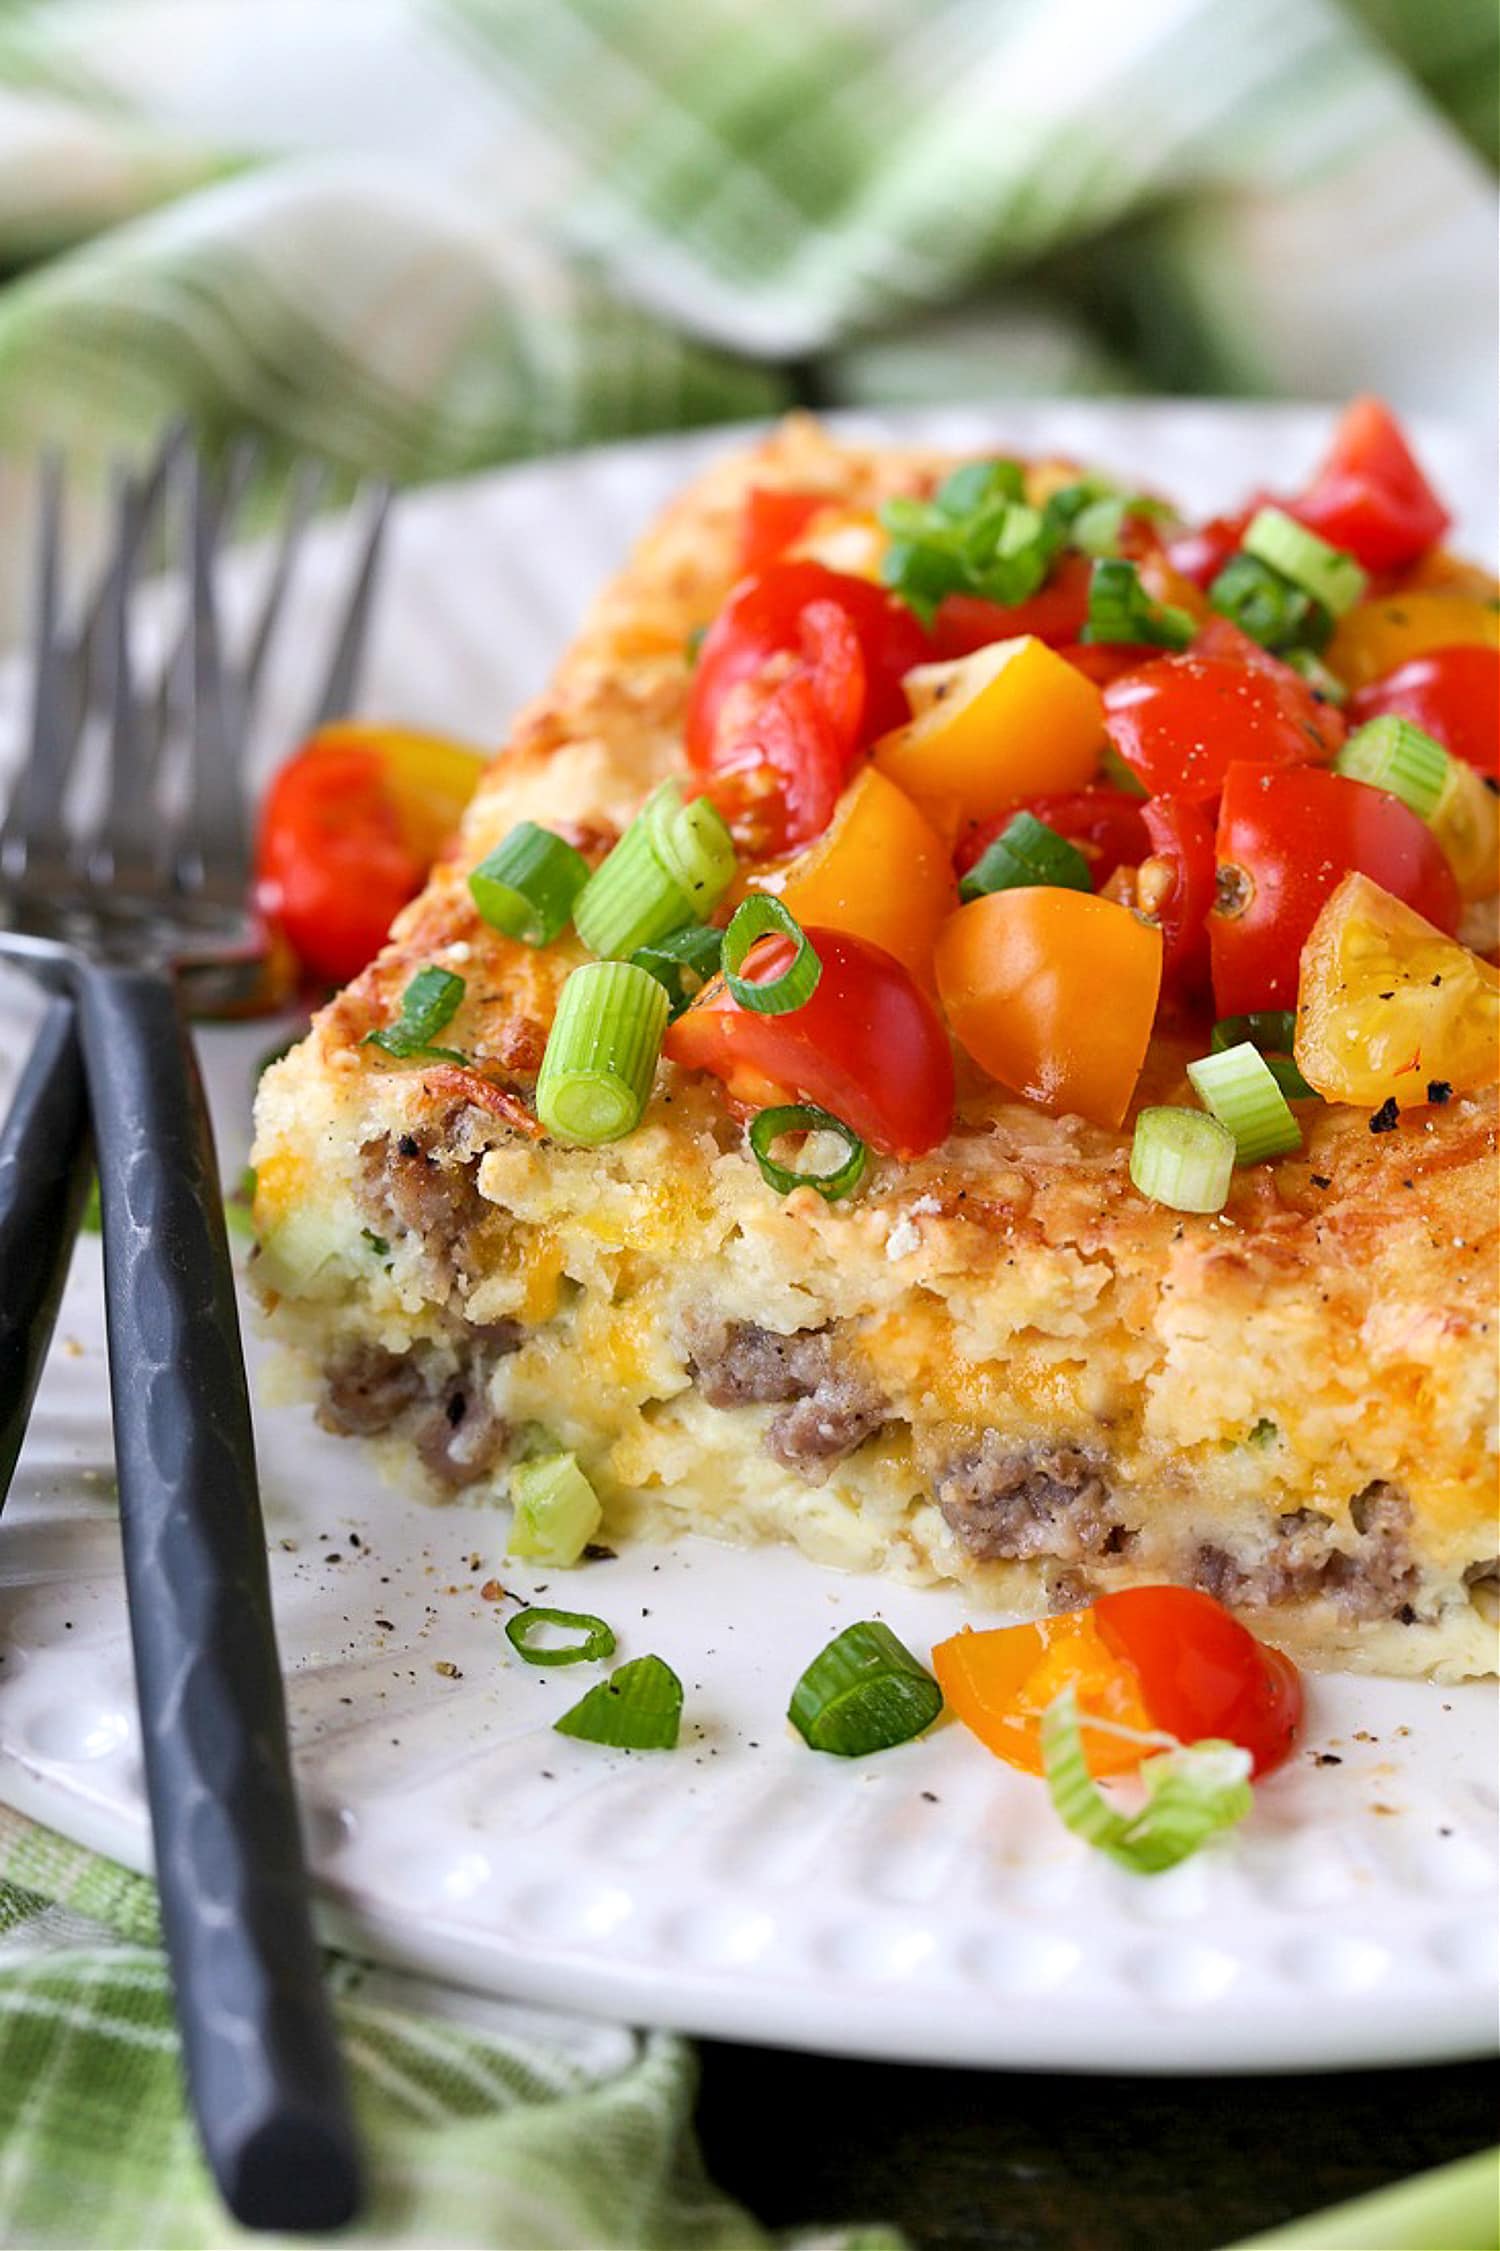 sausage breakfast casserole on plate with forks